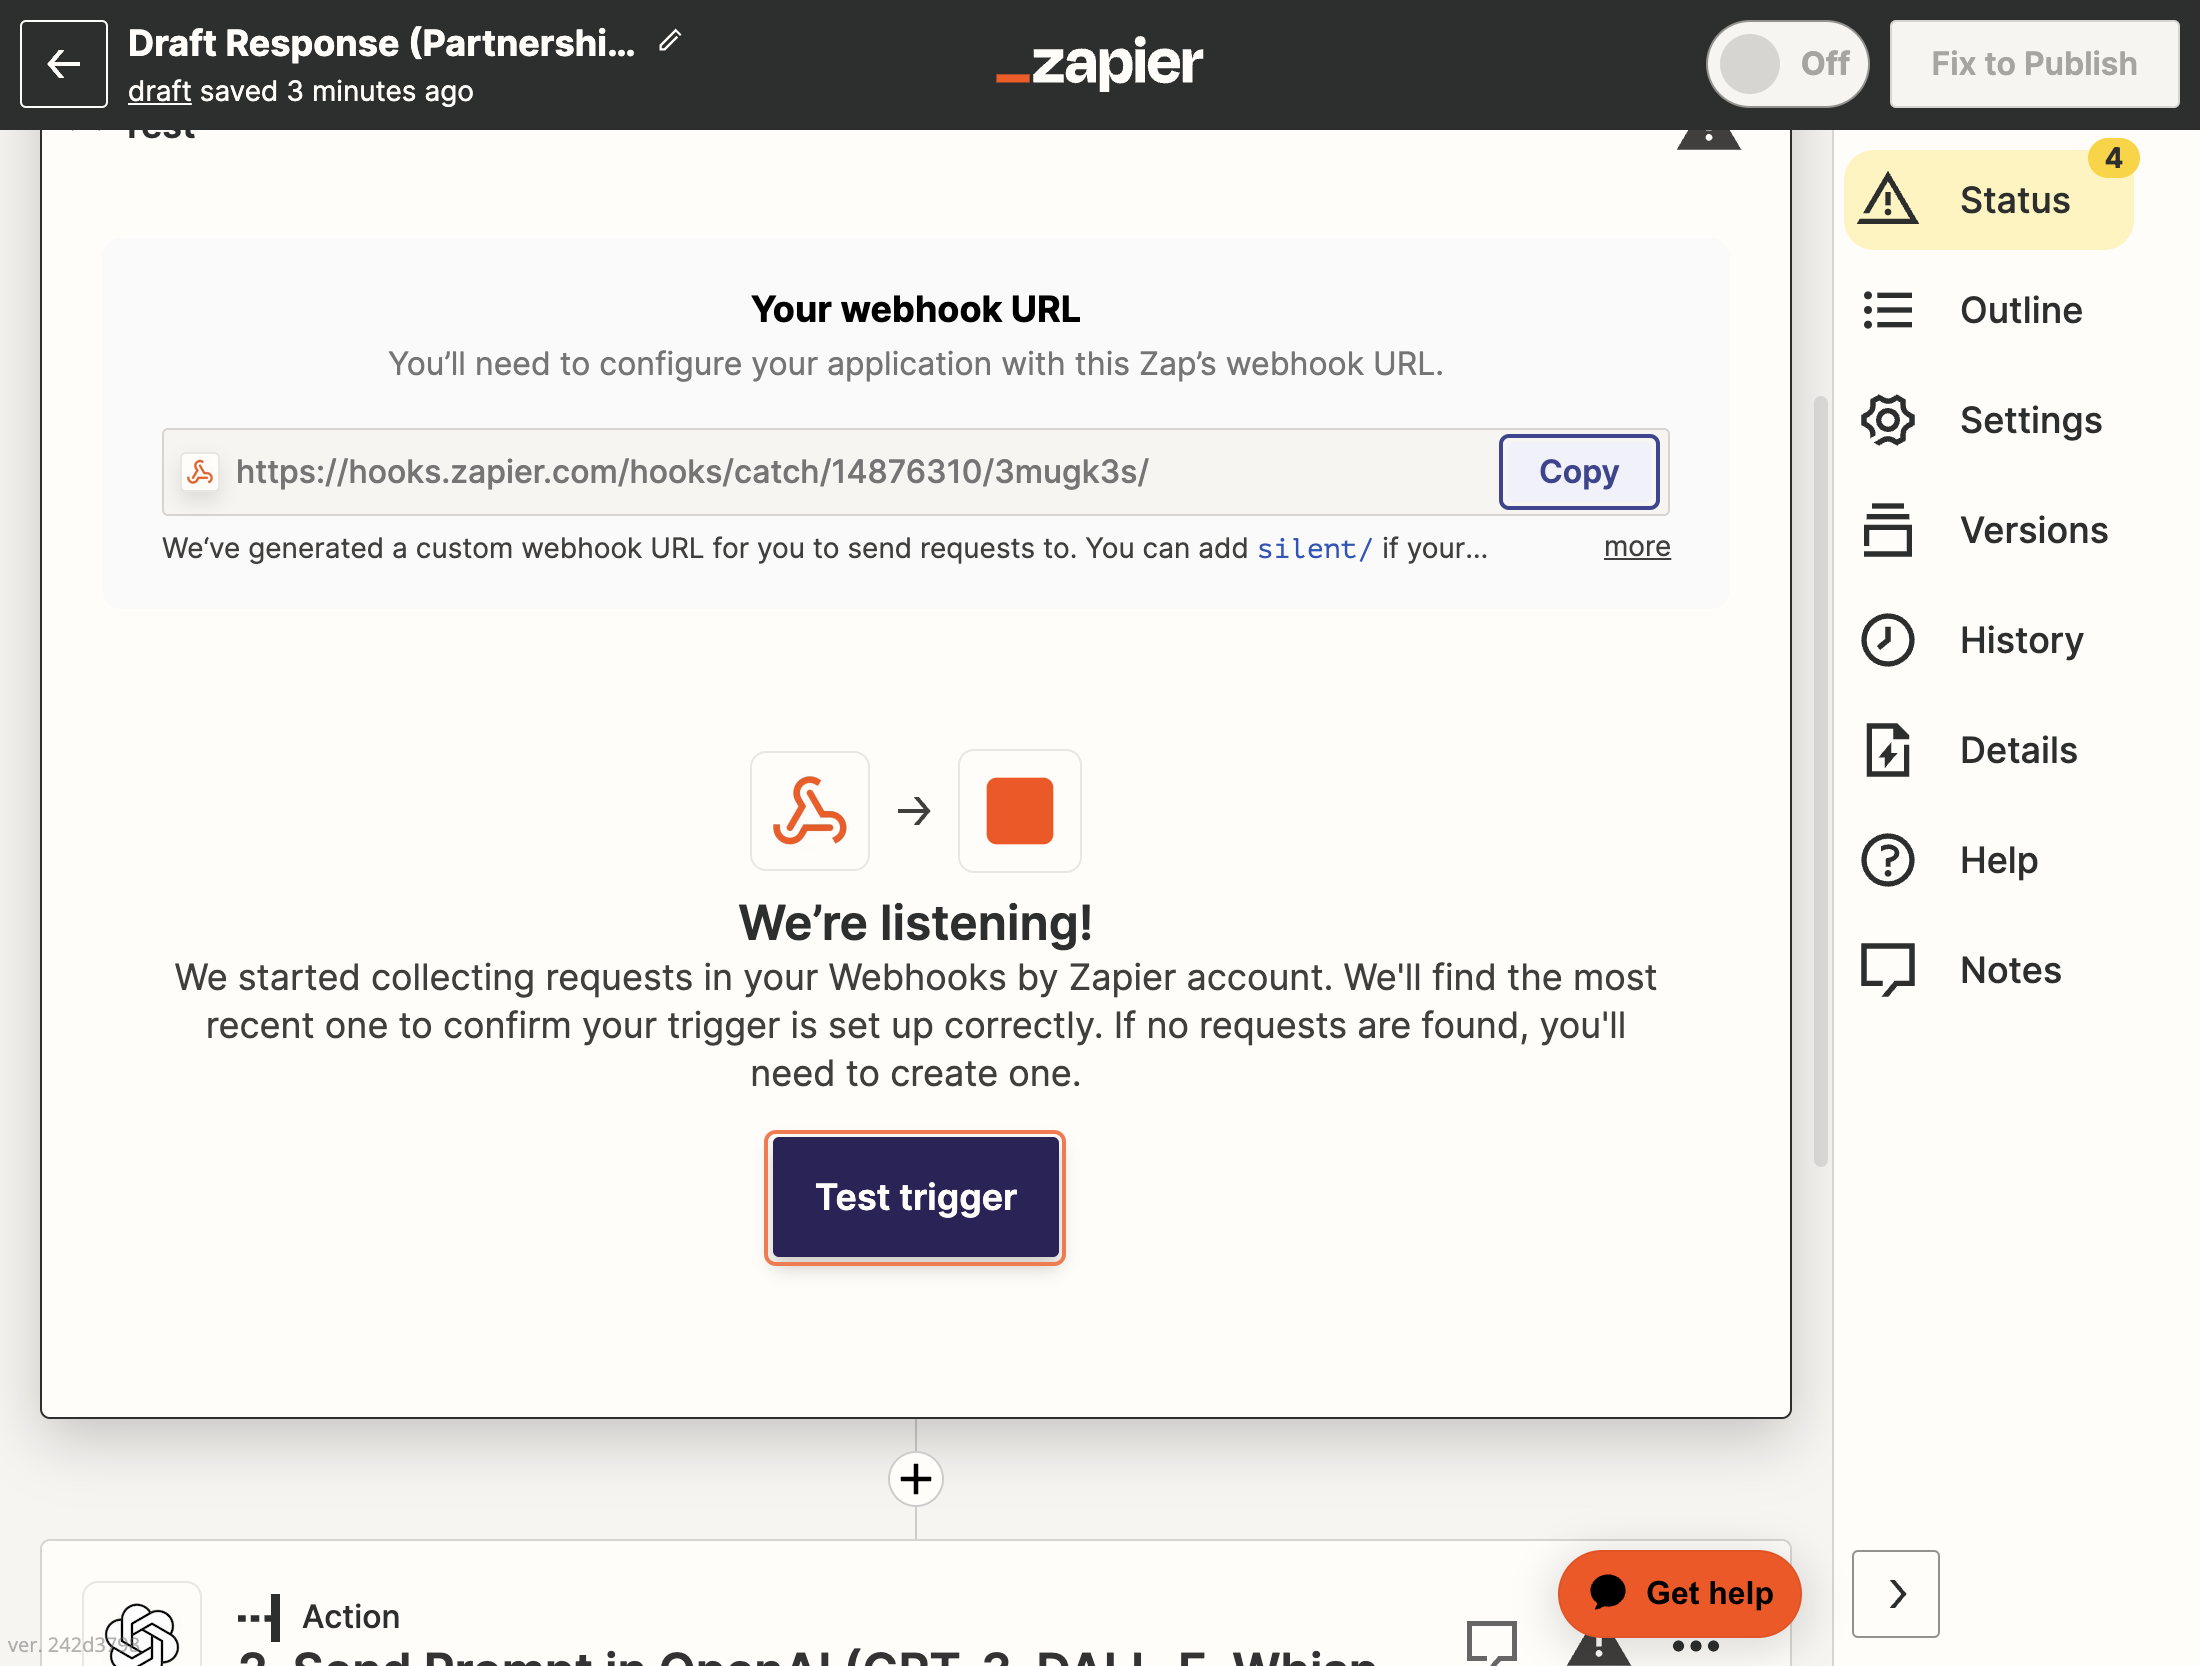 Go back to Zapier and Click on Test trigger